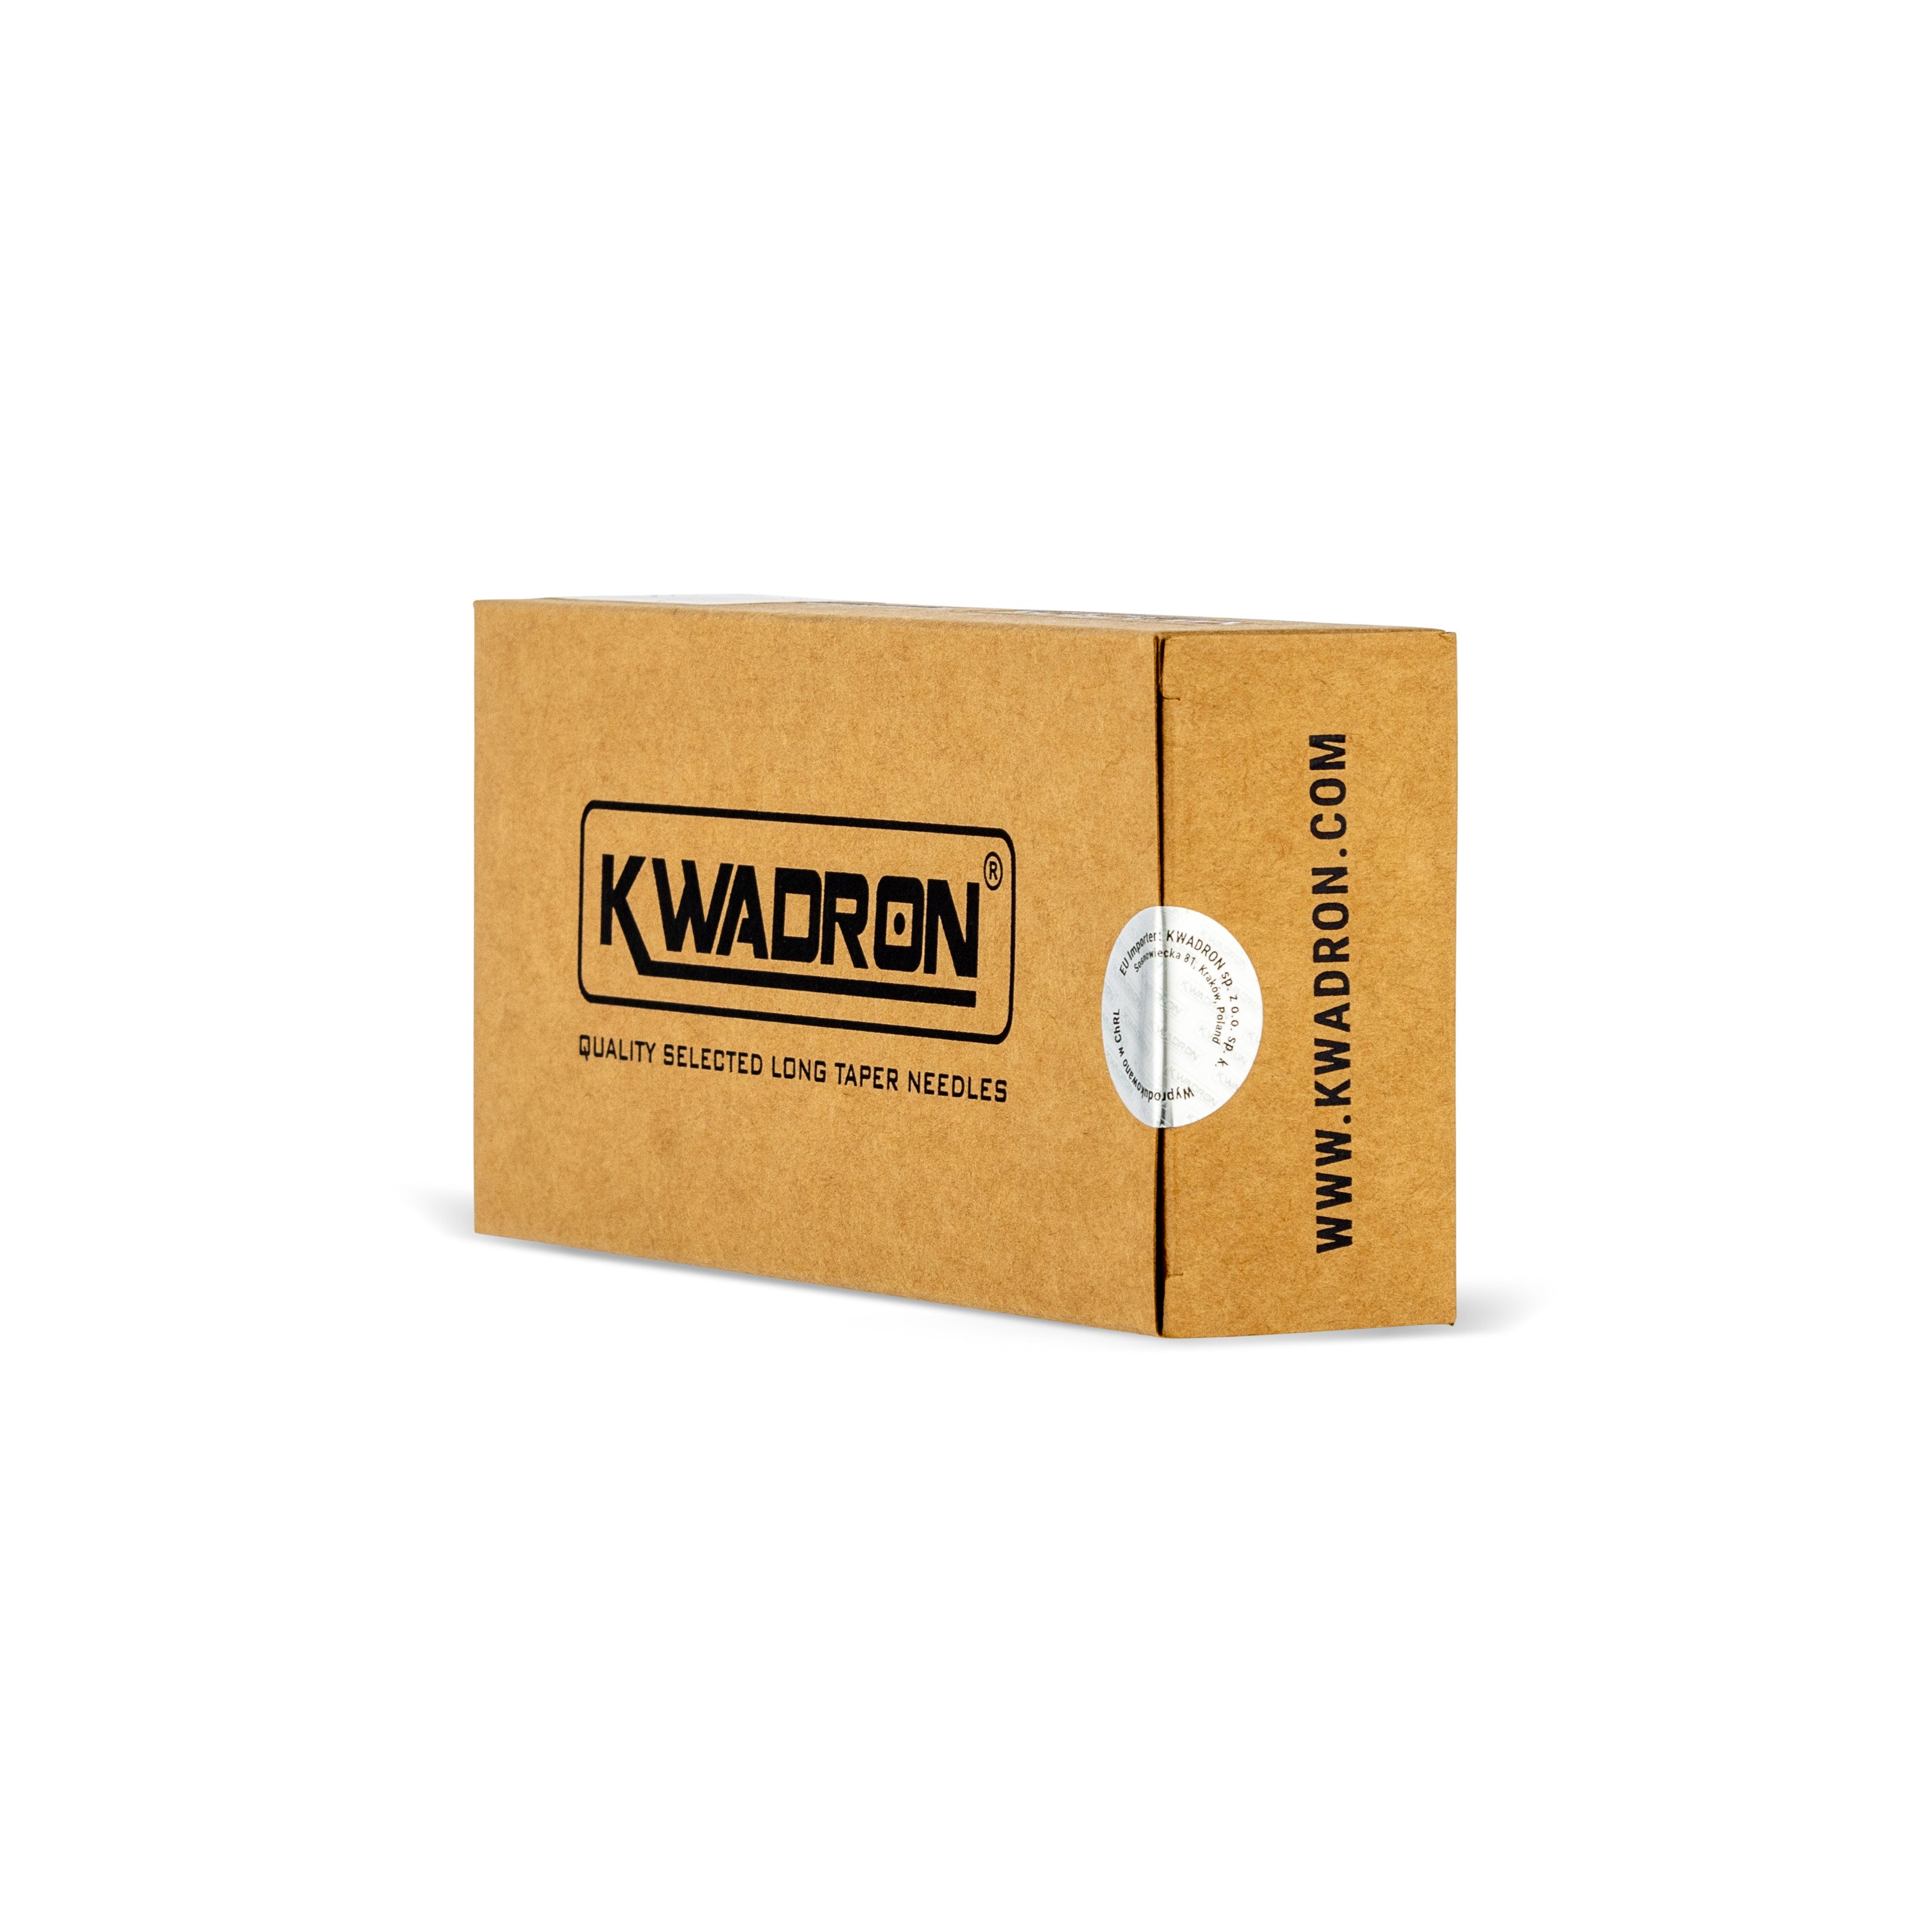 Kwadron Conventional Tattoo needles 50 Count Box